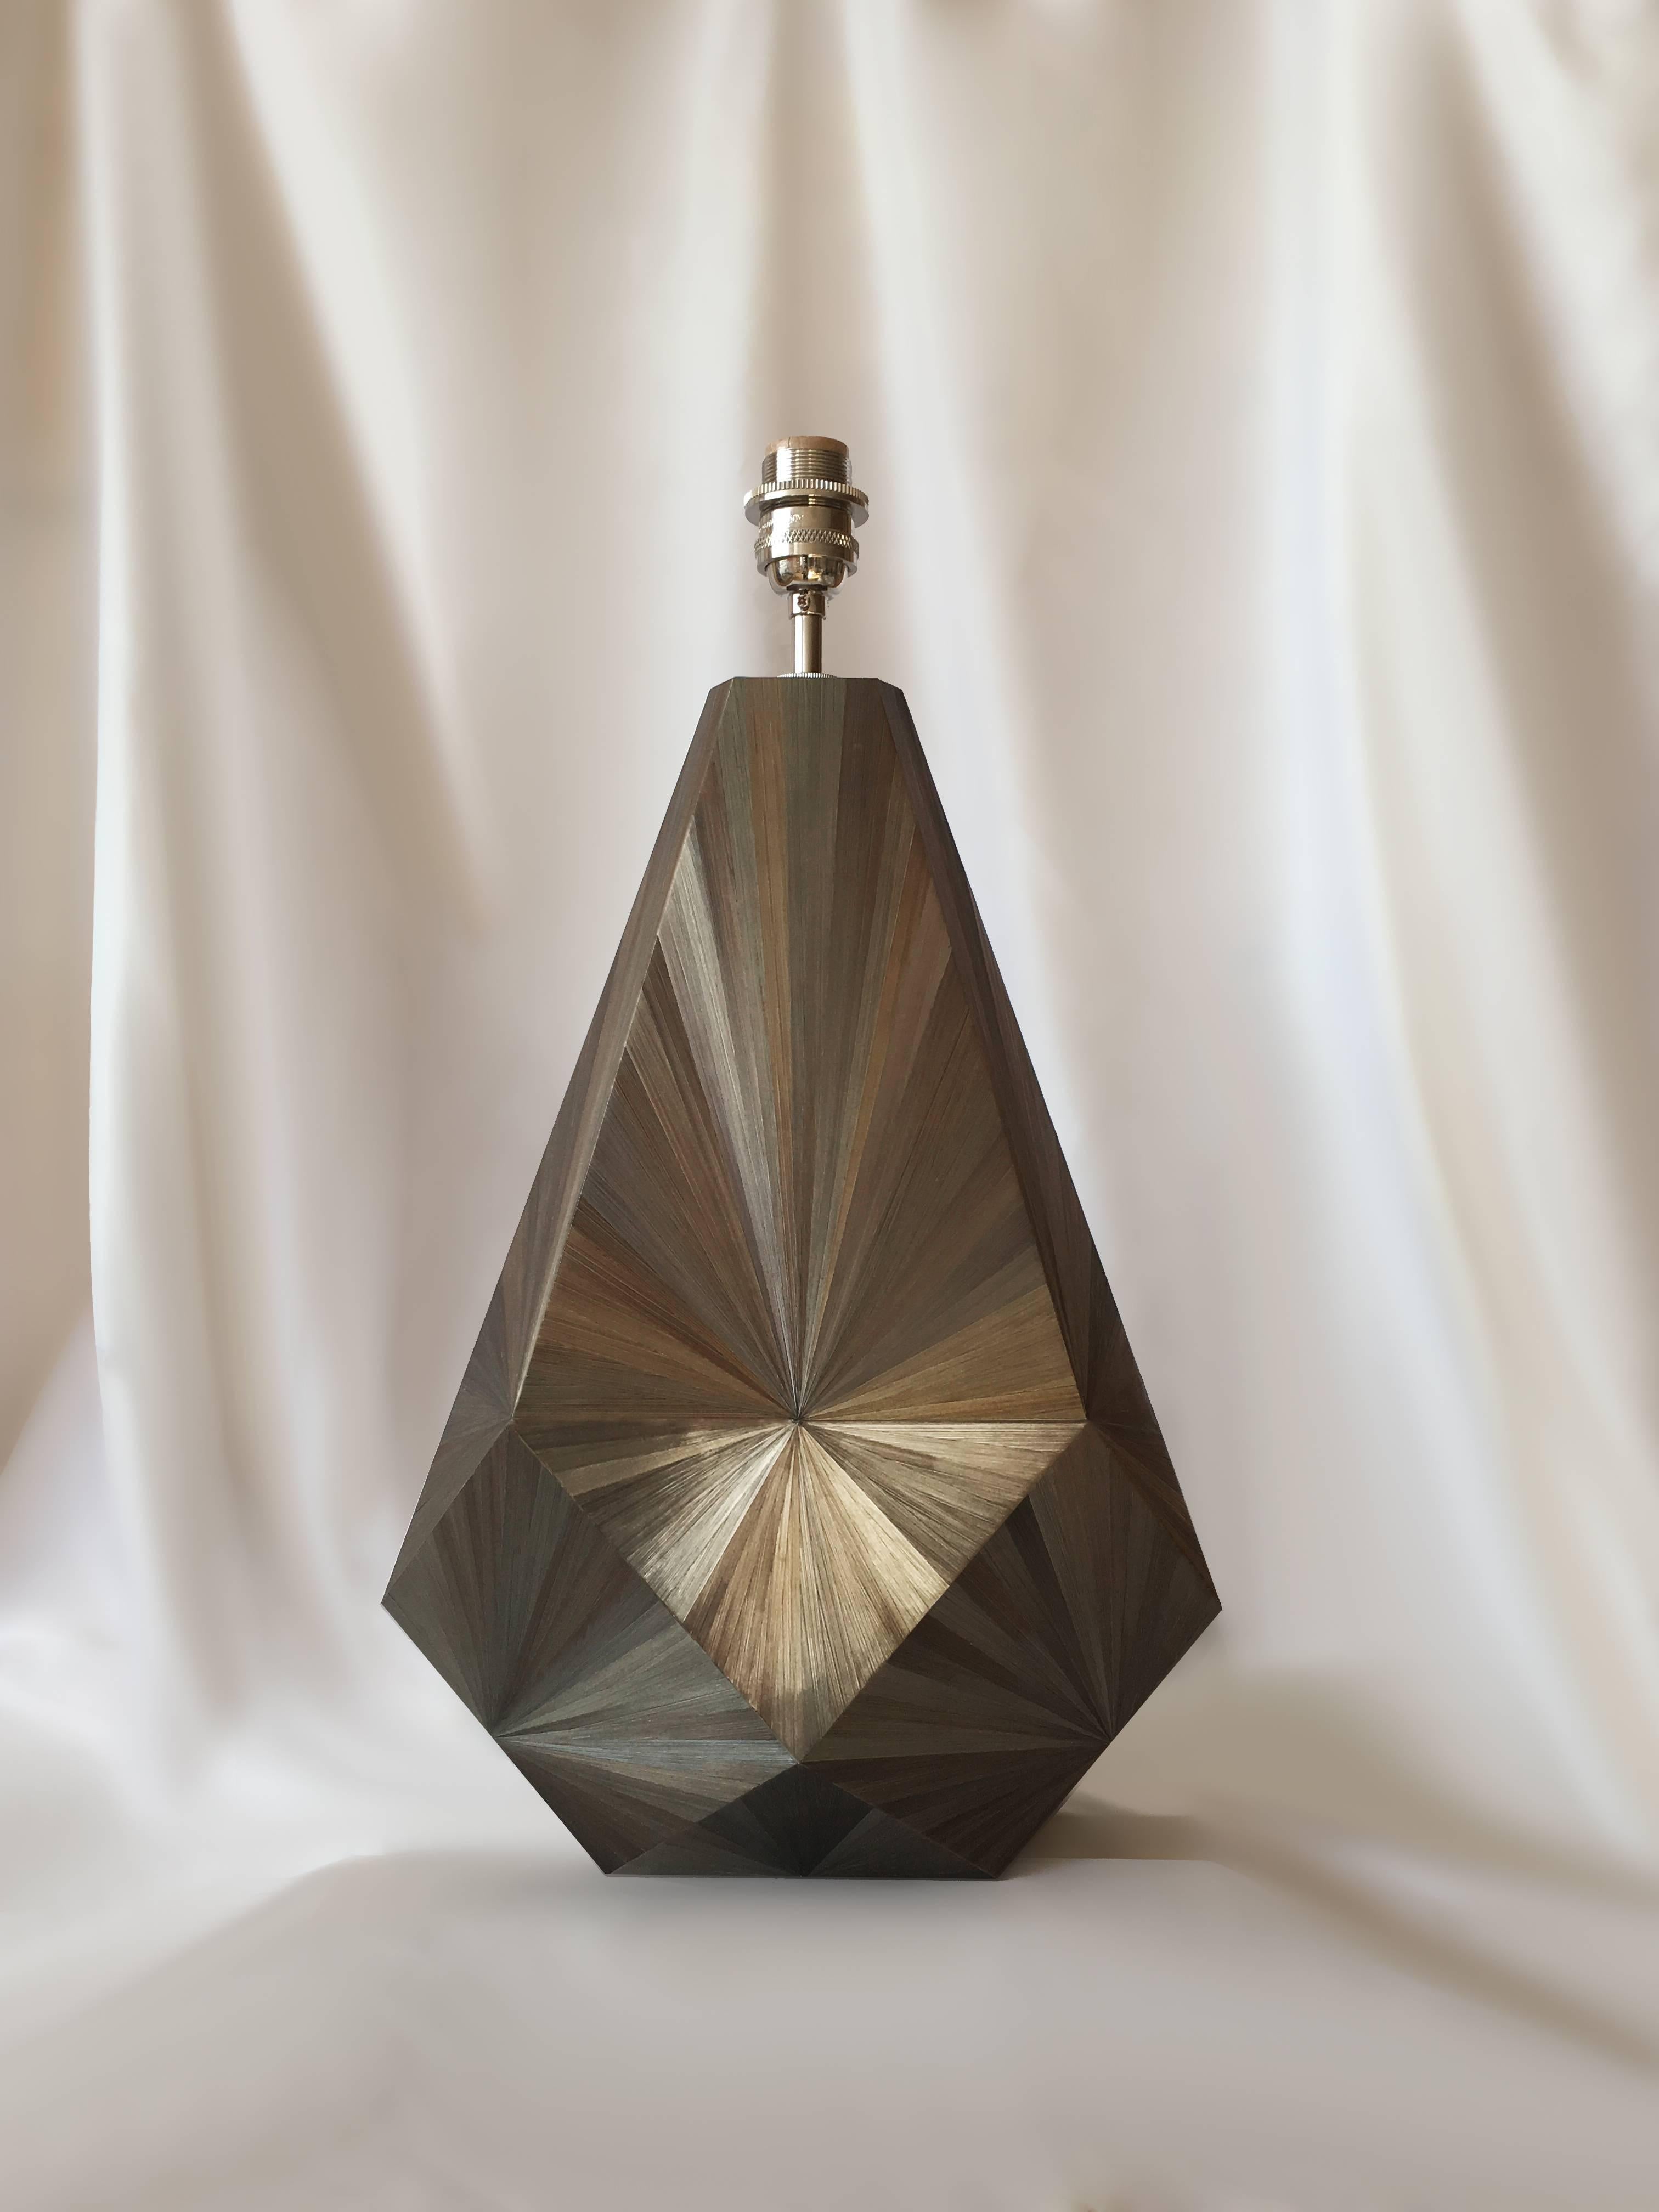 Ancient straw marquetry technique takes modern flair in our “Lise” faceted table lamp in color Grise Vert. Features brass bulb holder and silk cord. Ivory silk lampshade sold separately, €200
Can be purchased individually or as a pair. Bespoke